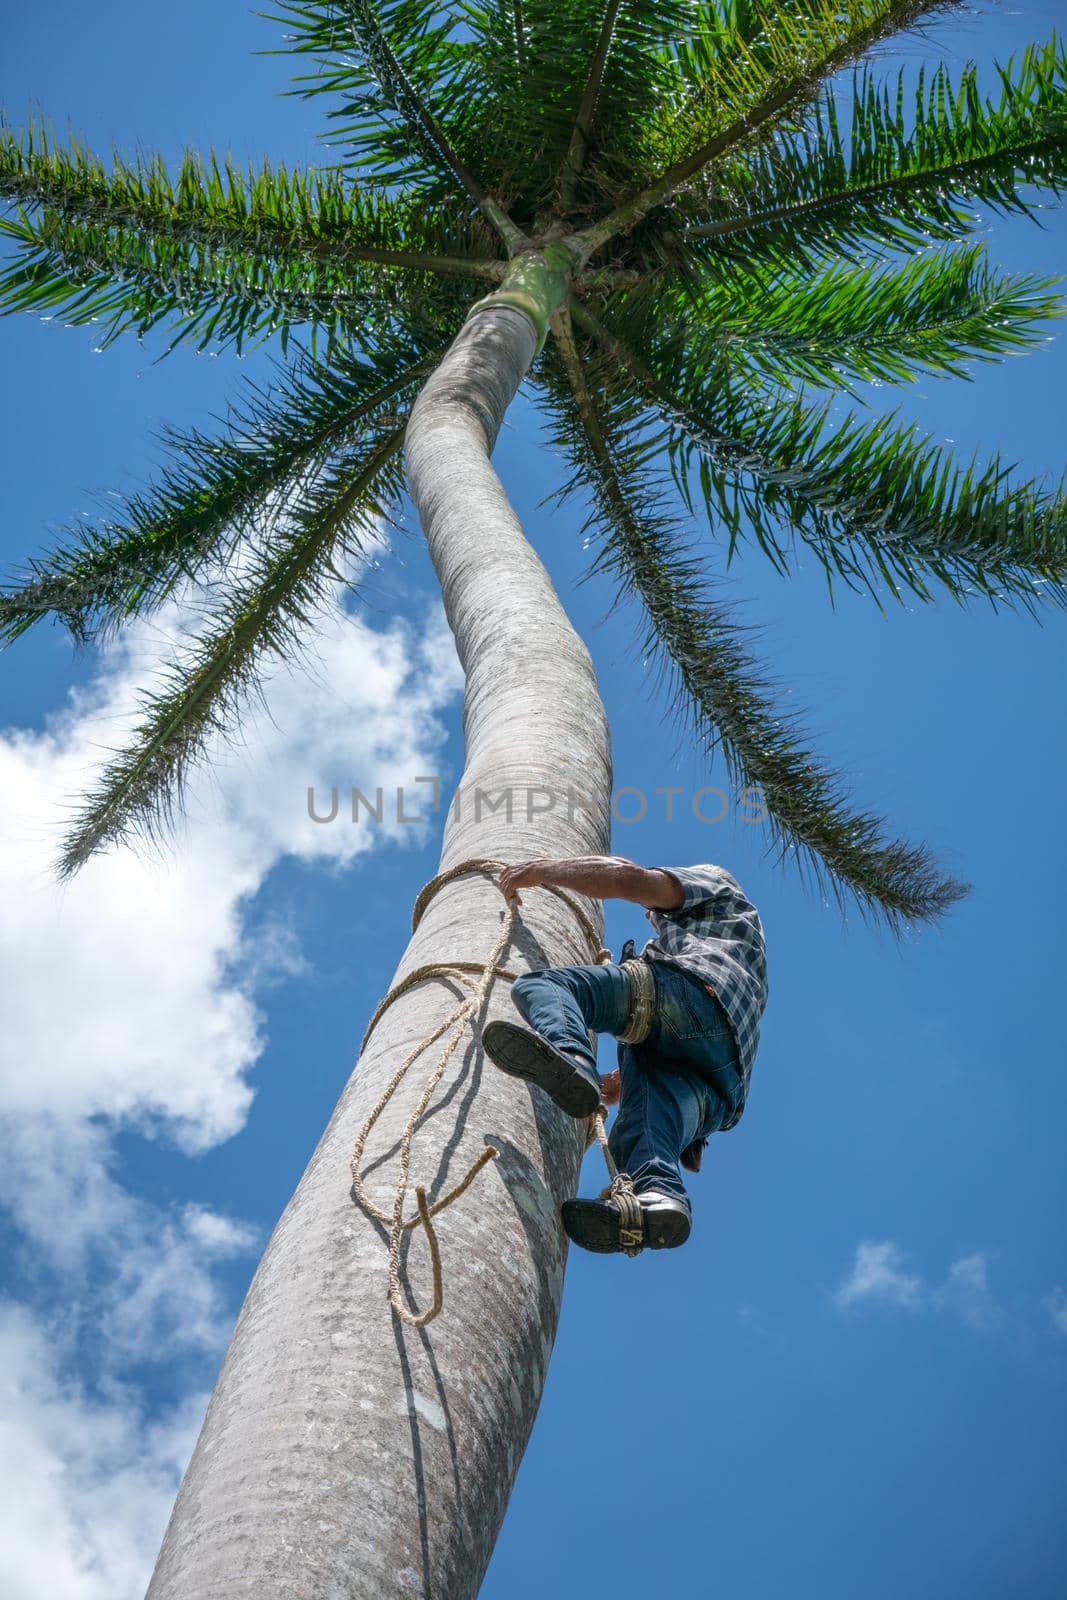 Adult male climbs coconut tree to get coco nuts by Arsgera